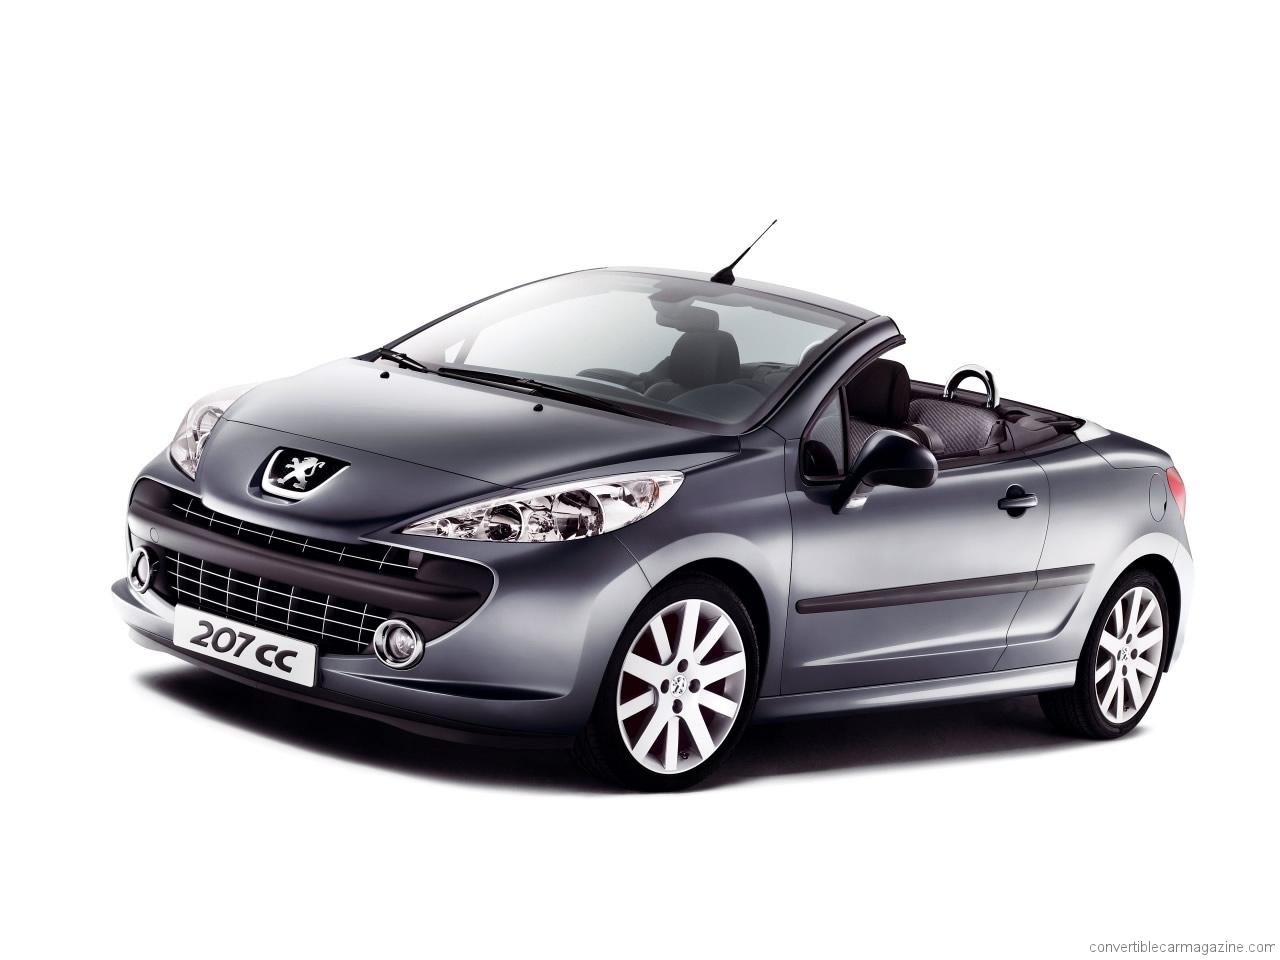 Peugeot 207 CC Buying Guide